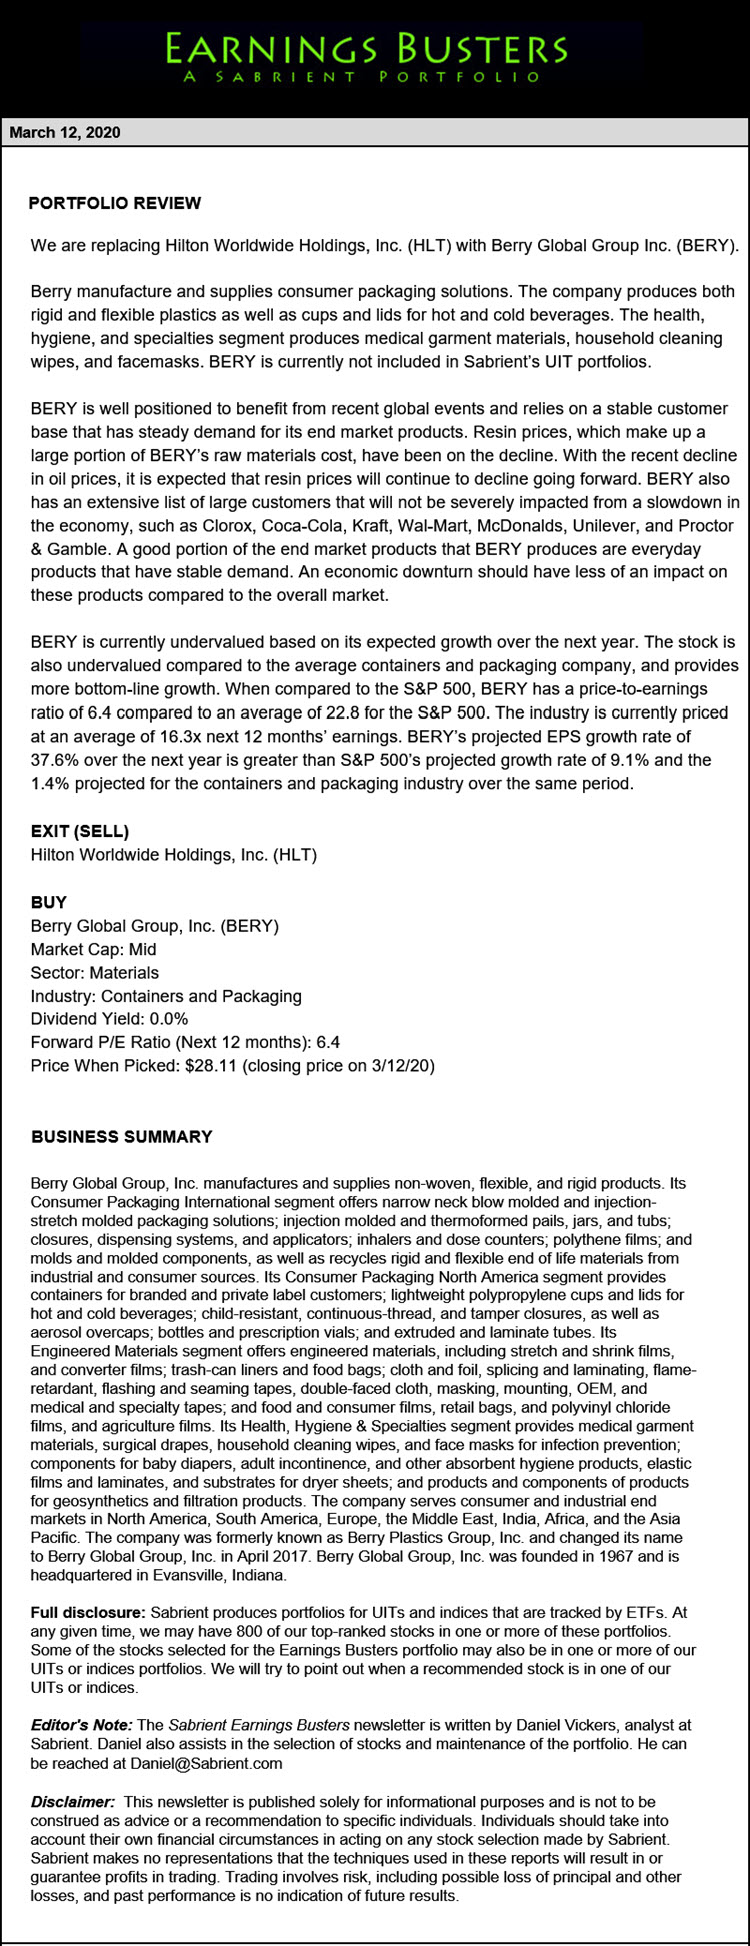 Earnings Busters Newsletter - Narch 12, 2020